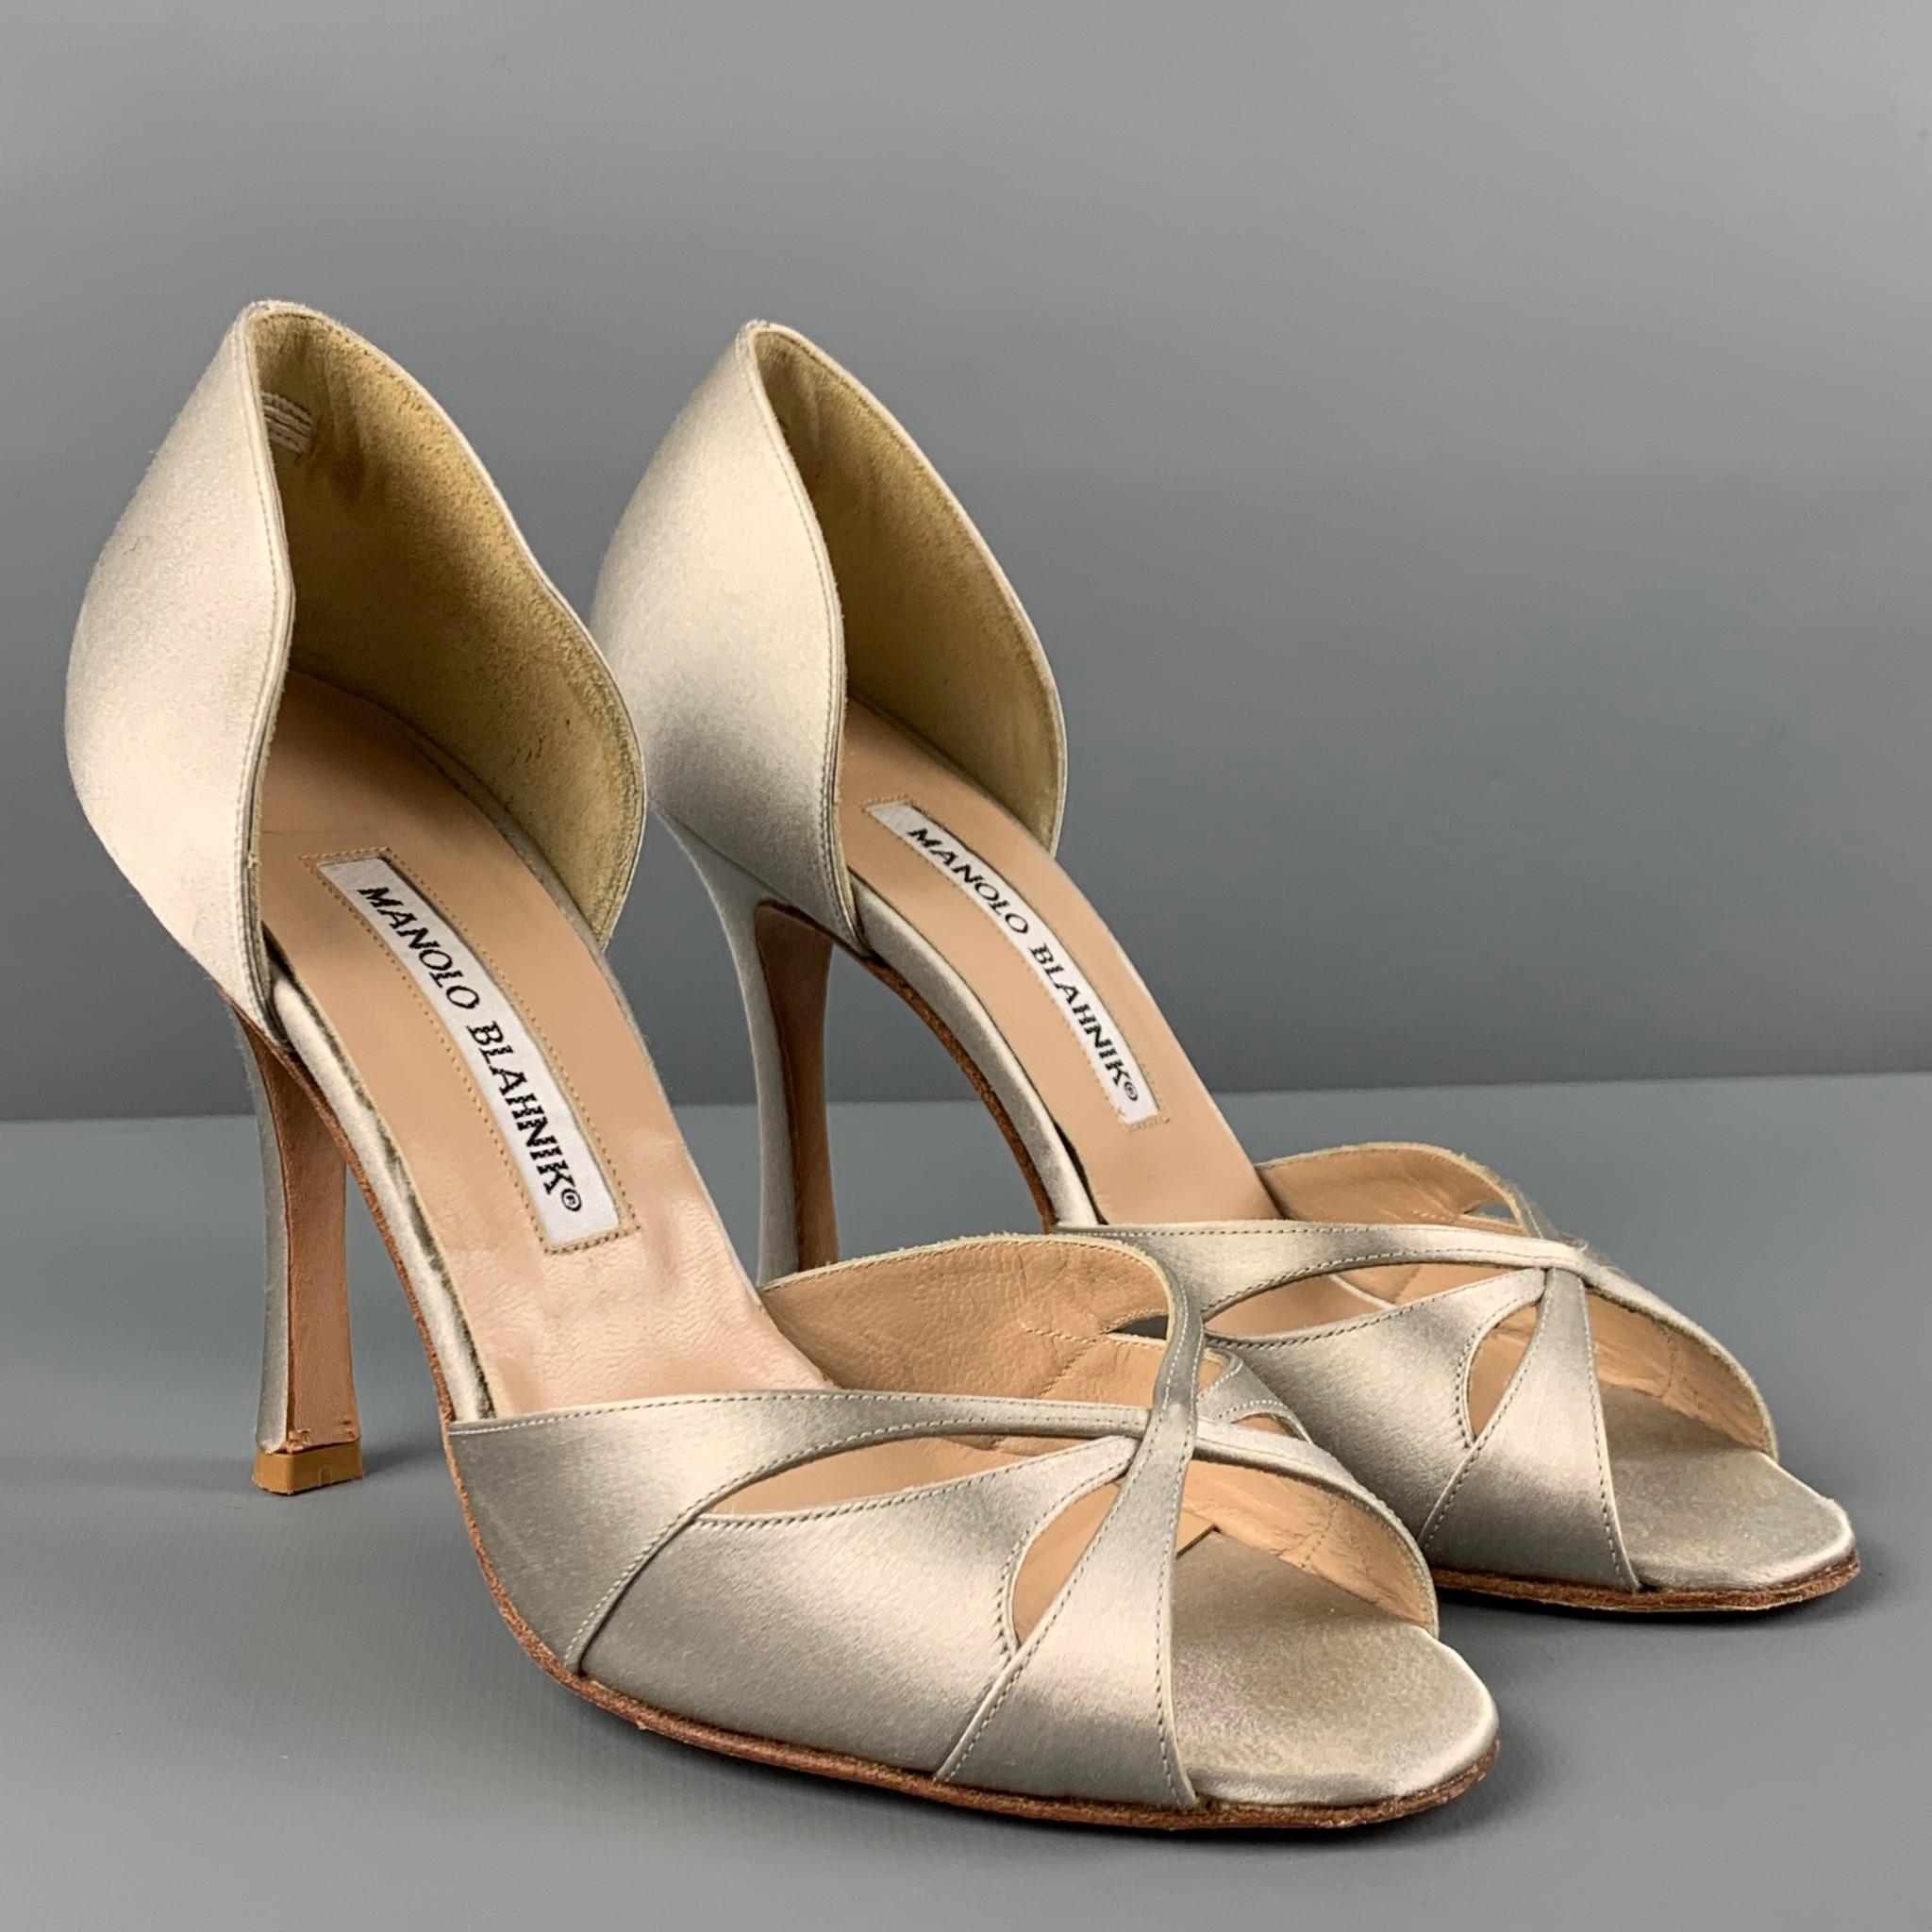 MANOLO BLAHNIK pumps comes in a gray silk featuring a d'orsay style, open toe, and a stiletto heel. Made in Italy. 

Very Good Pre-Owned Condition.
Marked: 36.5

Measurements:

Heel: 4 in. 